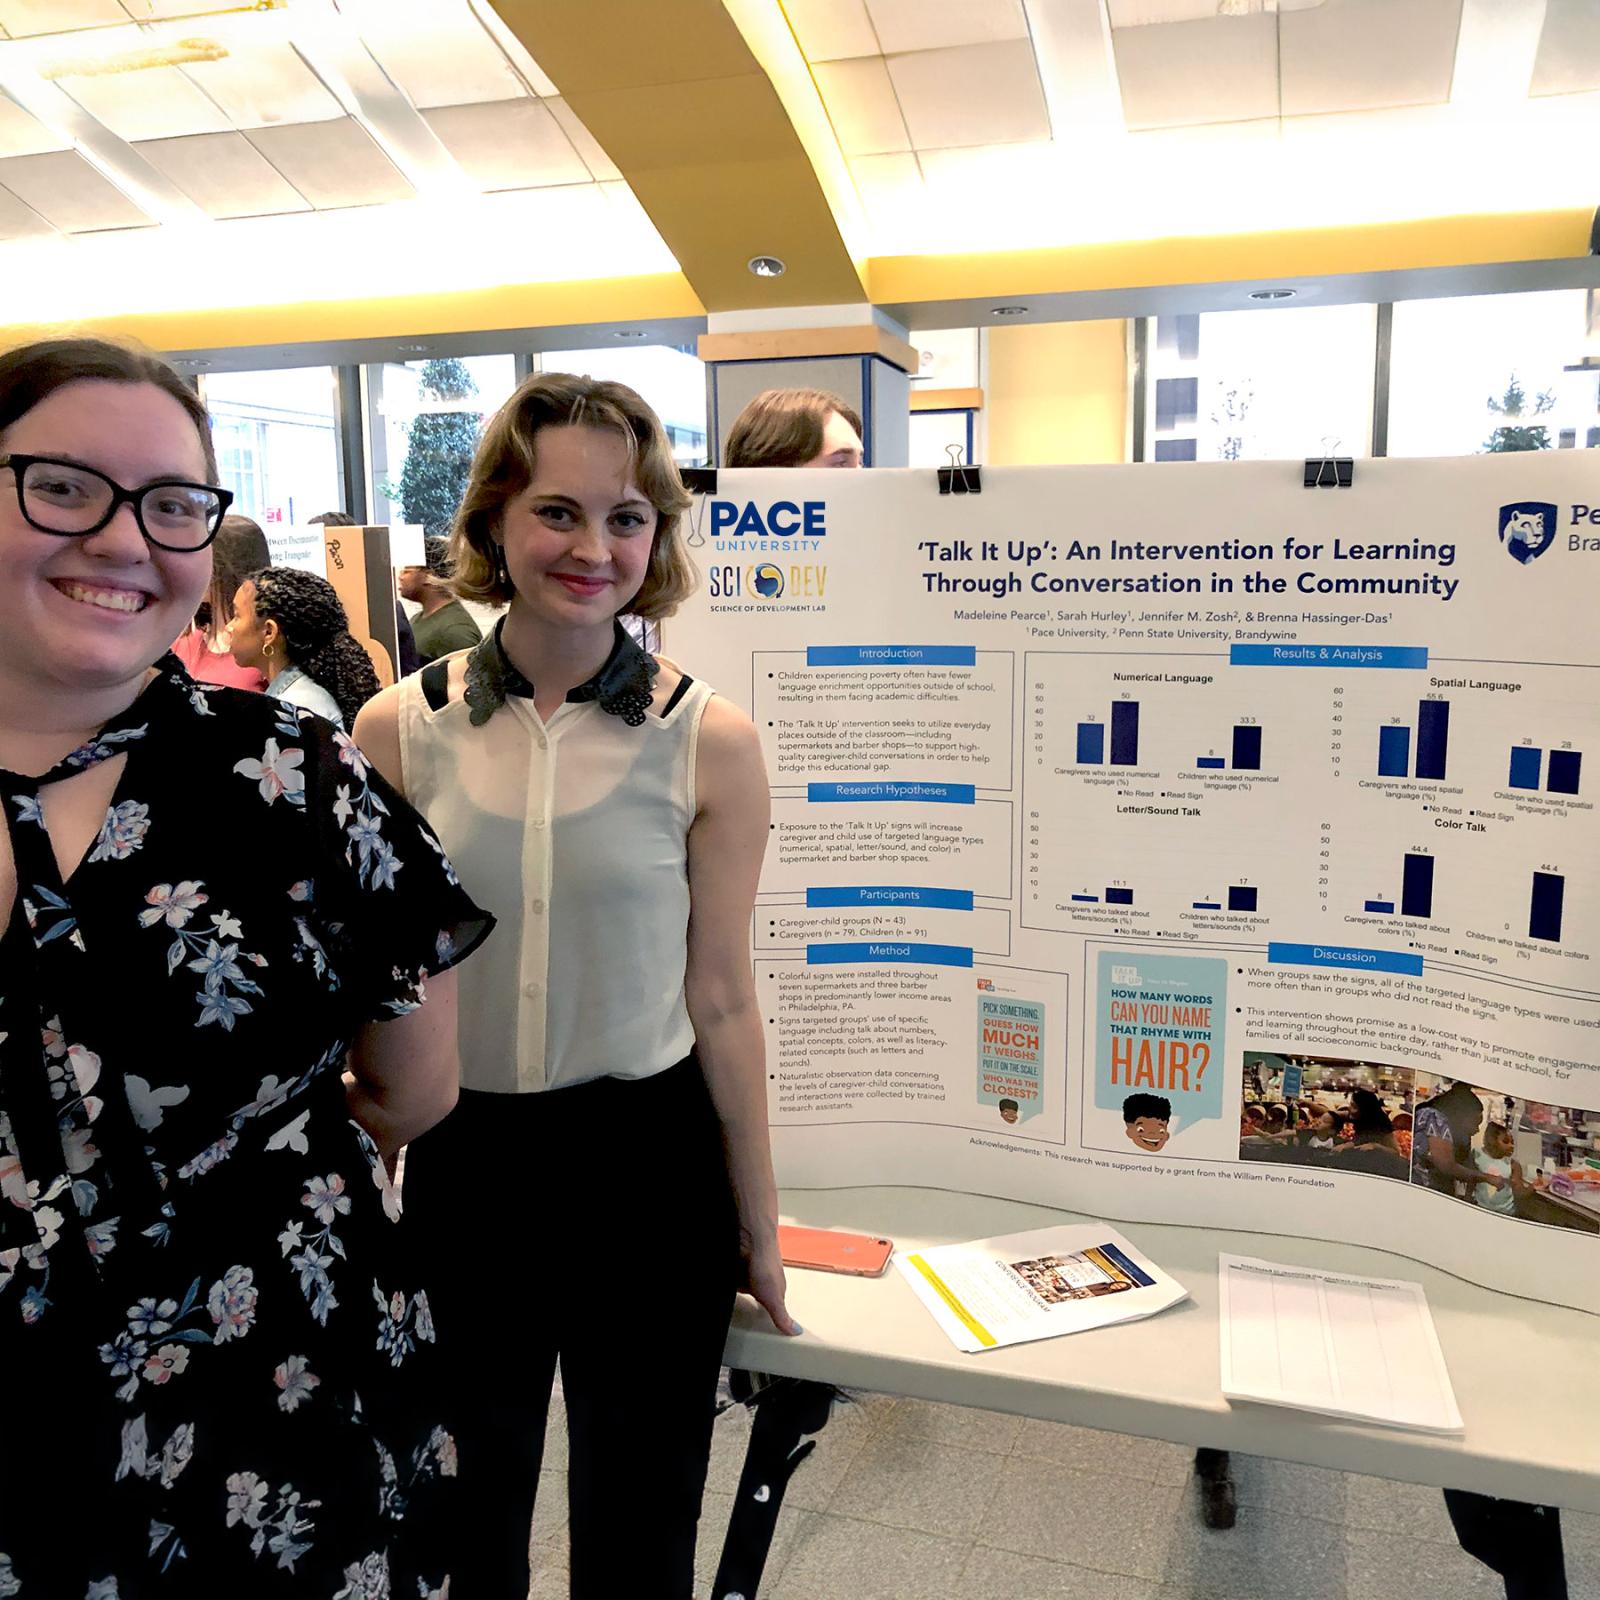 Two Pace University Psychology NYC students present research on a poster for a Psychology conference